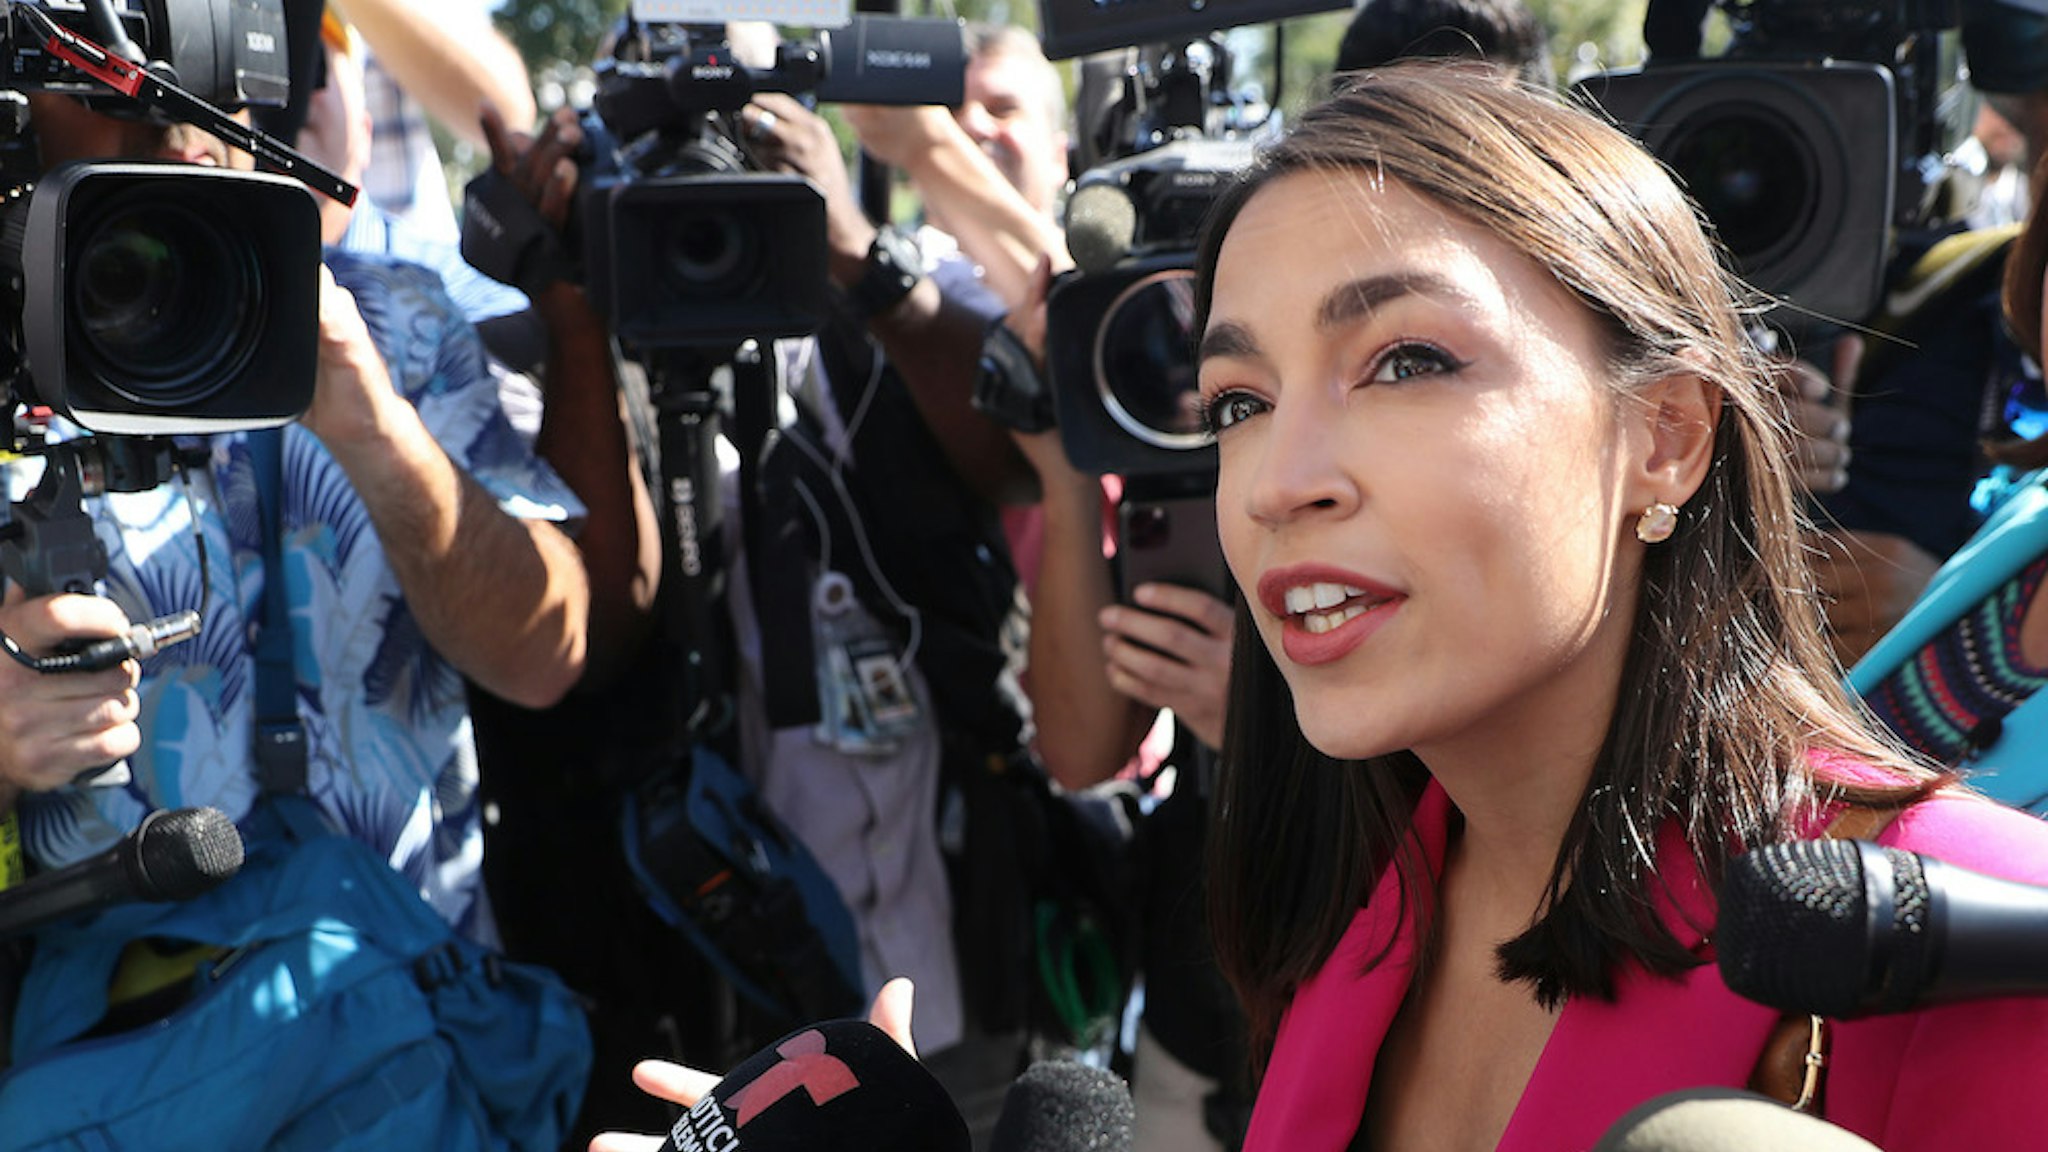 Rep. Alexandria Ocasio-Cortez (D-NY) talks to reporters before heading into the U.S. Capitol Building for final votes before a two-week state work period September 27, 2019 in Washington, DC. Following the release of a whistle-blower complaint claiming abuse of power by President Donald Trump, the House Democratic leadership announced this week that it is launching a formal impeachment inquiry. (Photo by Chip Somodevilla/Getty Images)